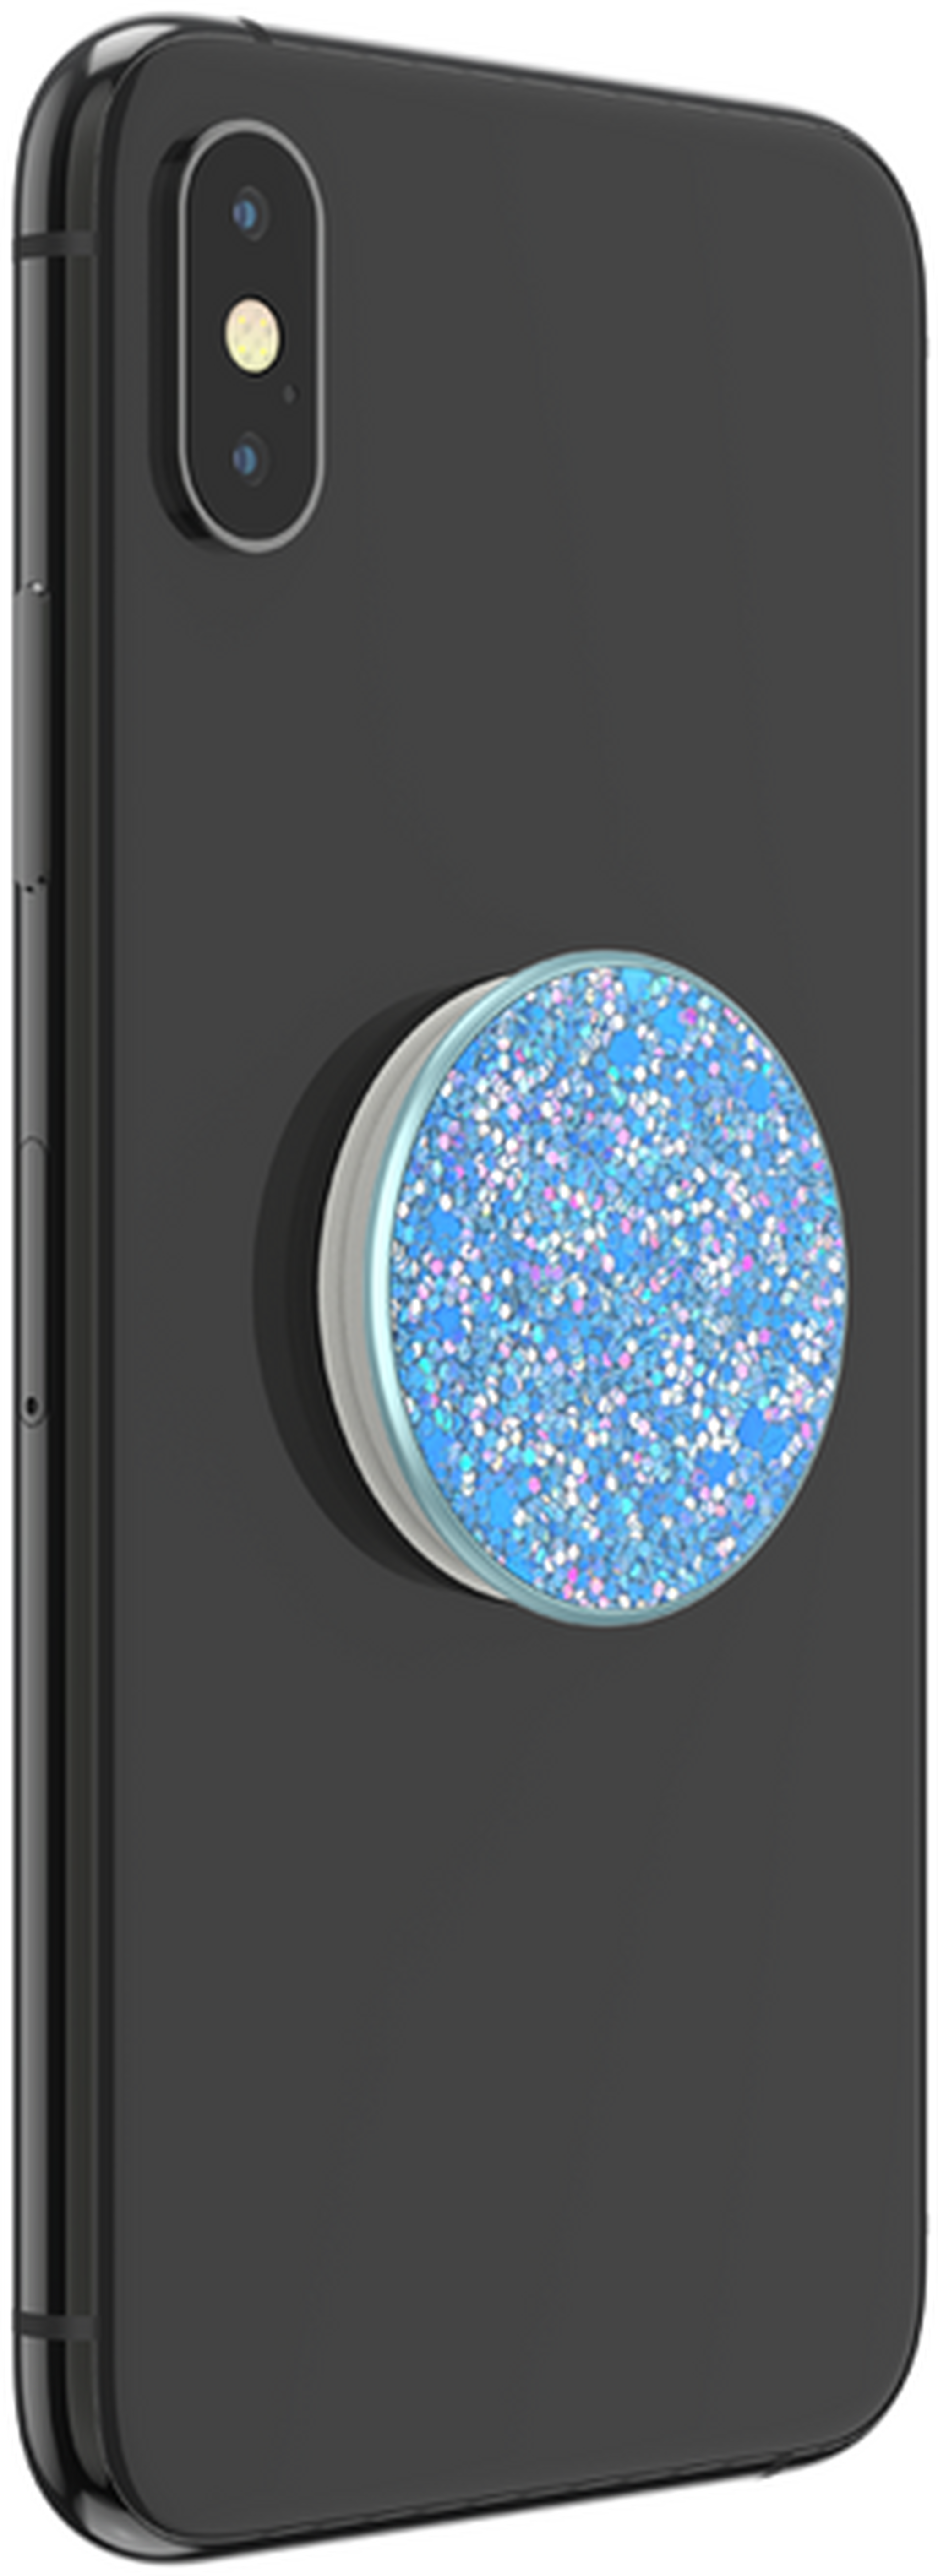 PopSockets Phone Stand and Grip (802444) – Sparkle Tidal Blue